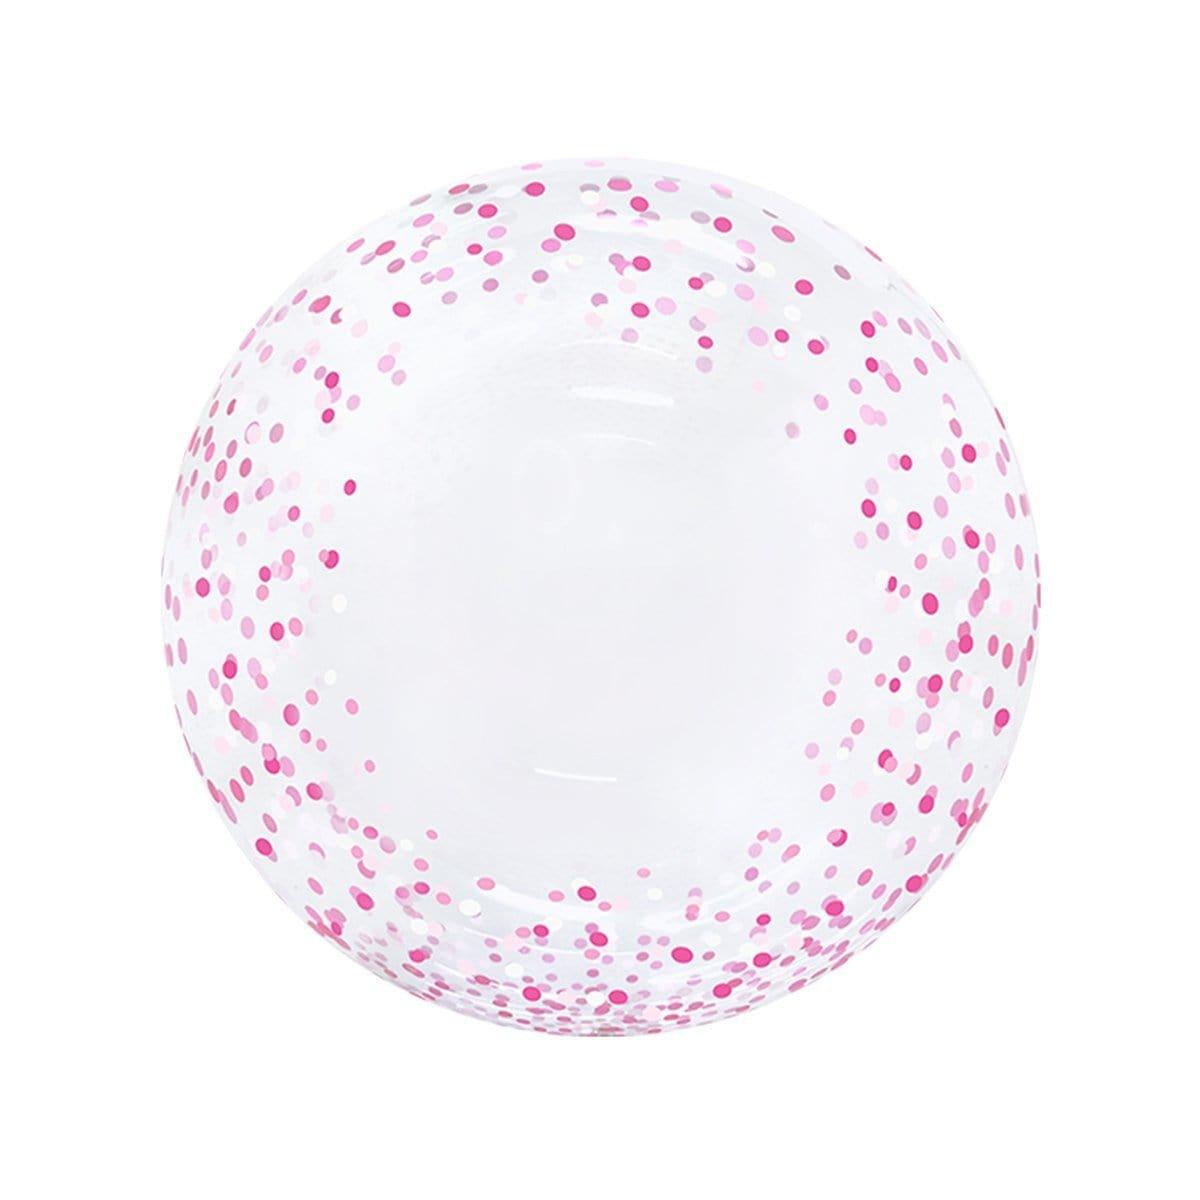 Buy Balloons HD Bubble Balloon, Pink Confetti, 20 Inches sold at Party Expert